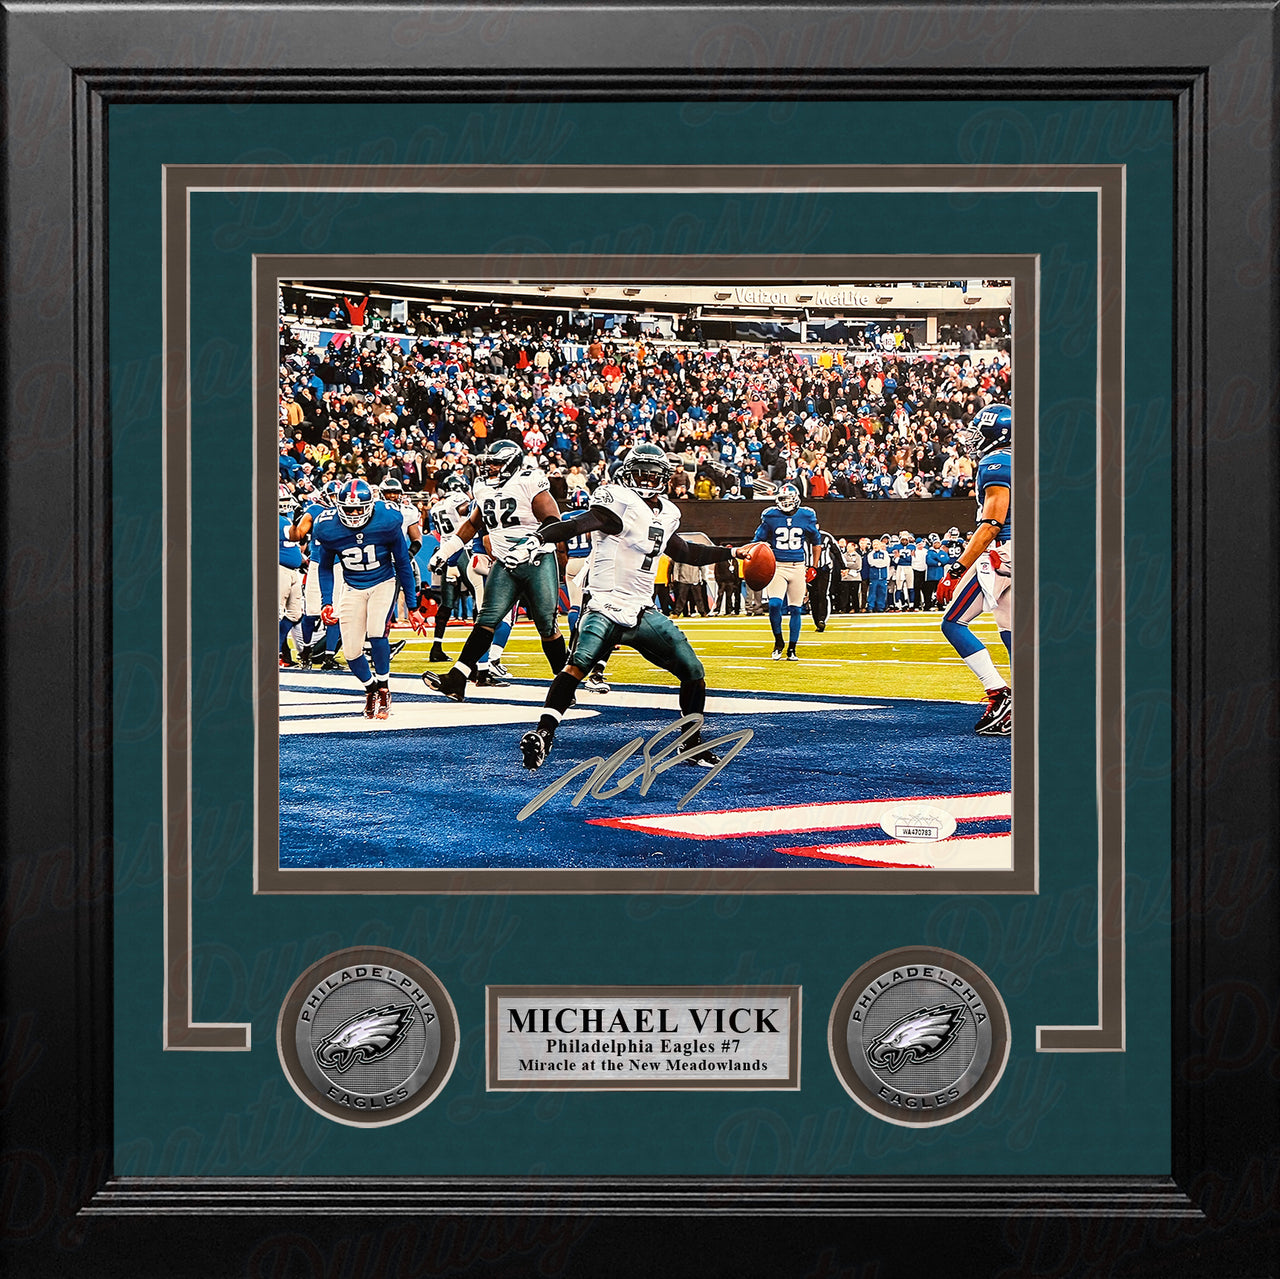 Michael Vick Miracle at the New Meadowlands Philadelphia Eagles Autographed Framed Football Photo - Dynasty Sports & Framing 